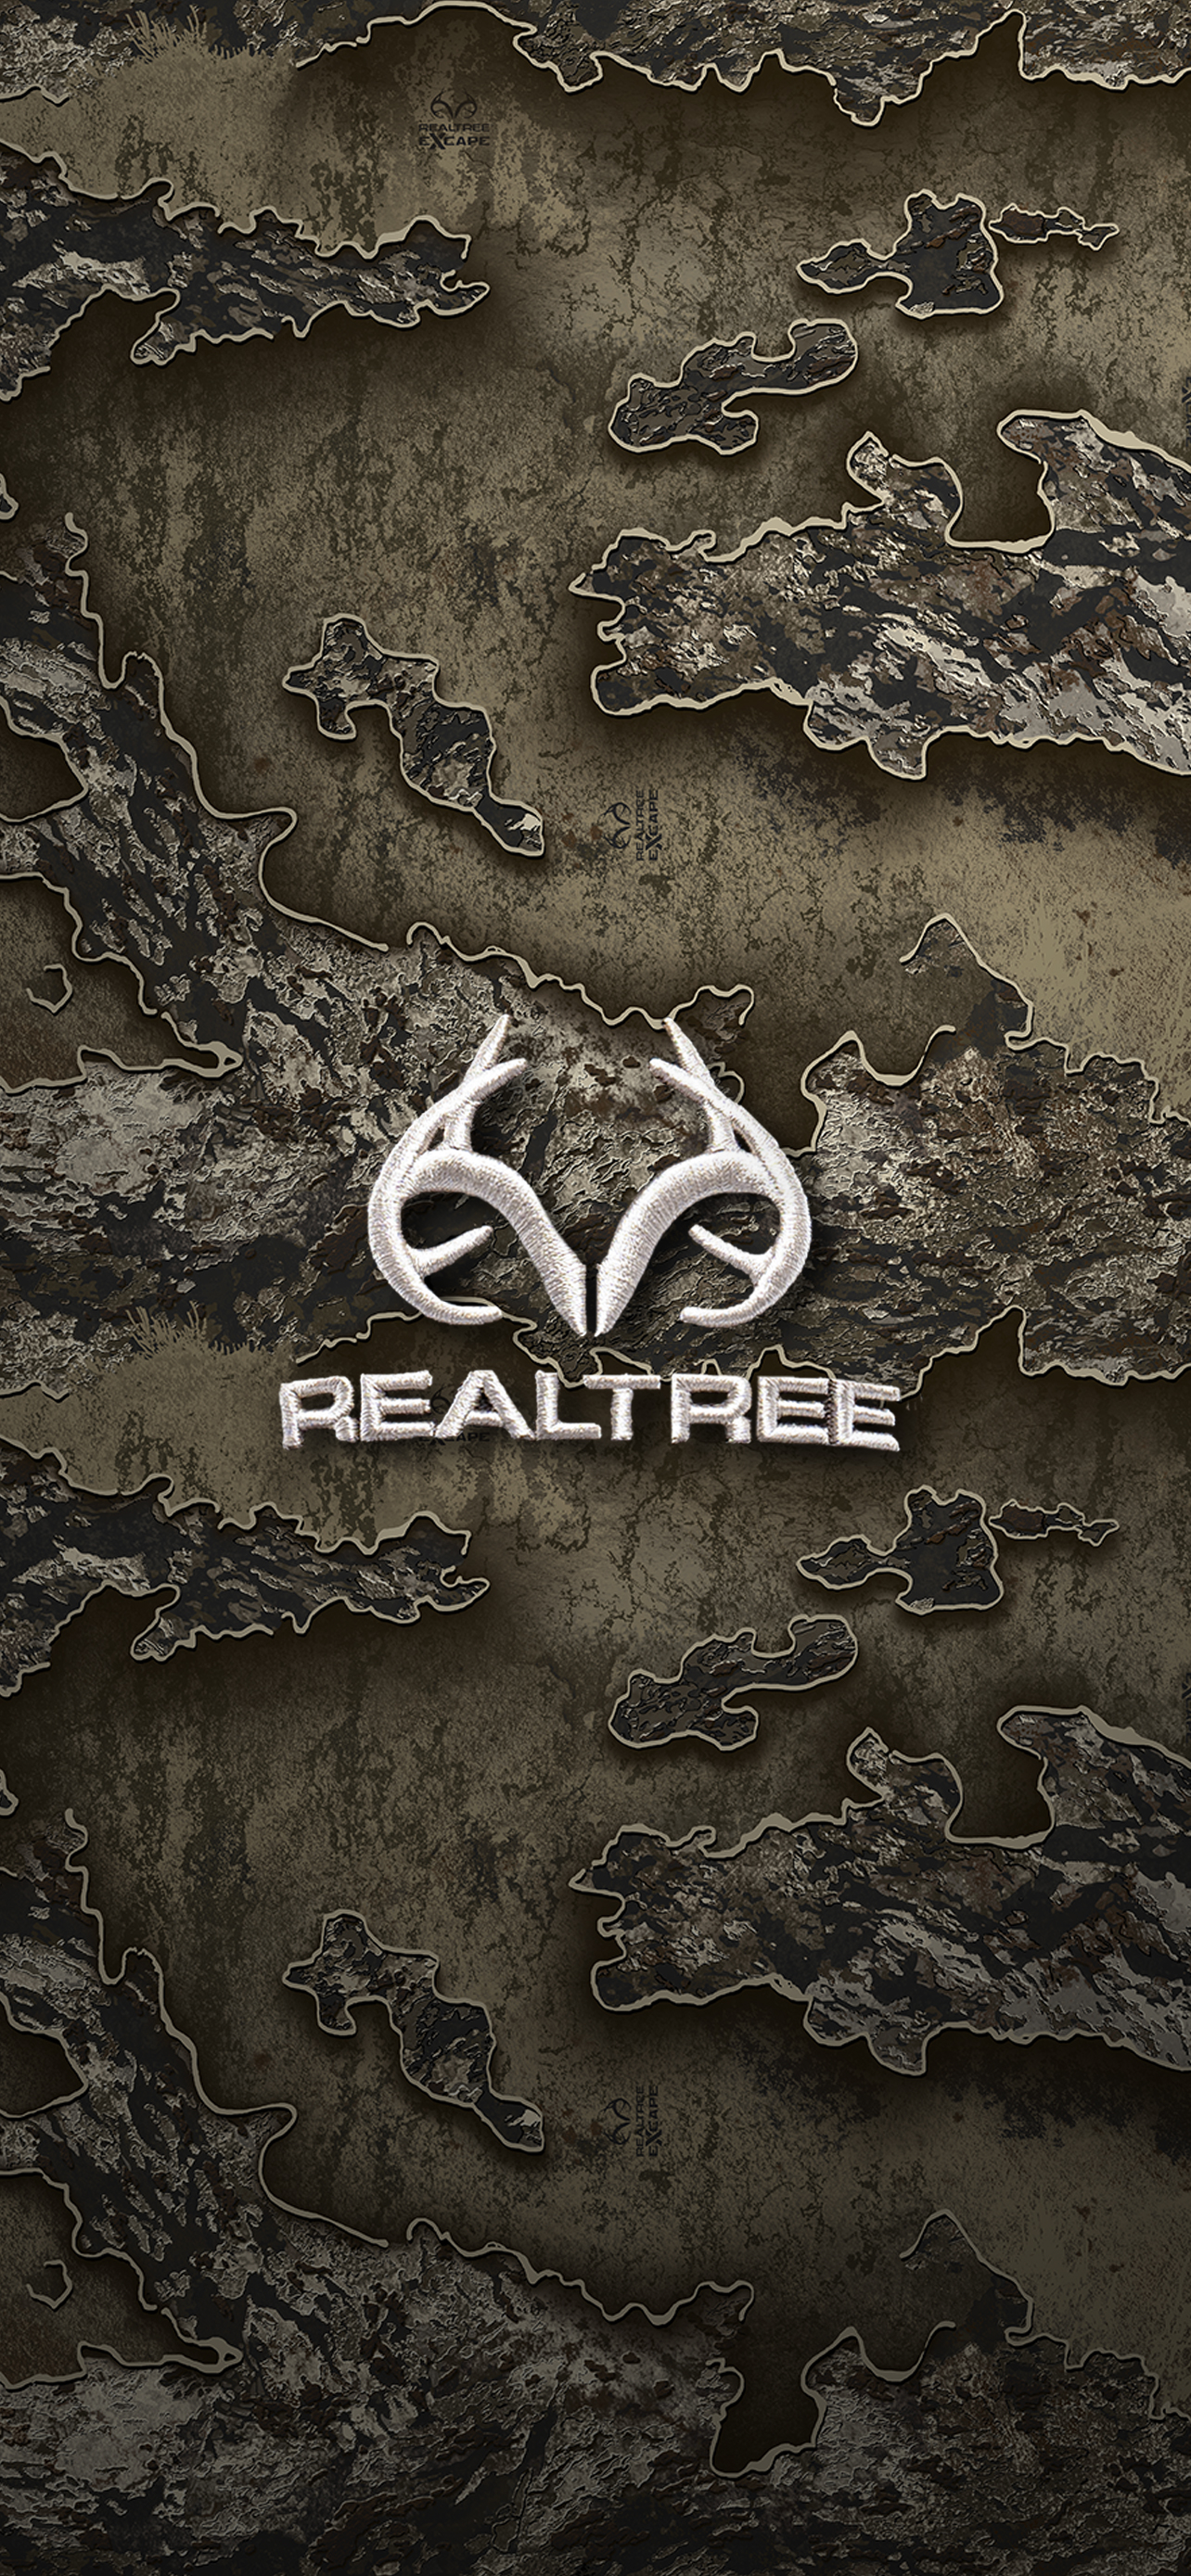 Realtree a Twitter: Who needs a new wallpaper? Freshen up that lock screen with #RealtreeExcape!